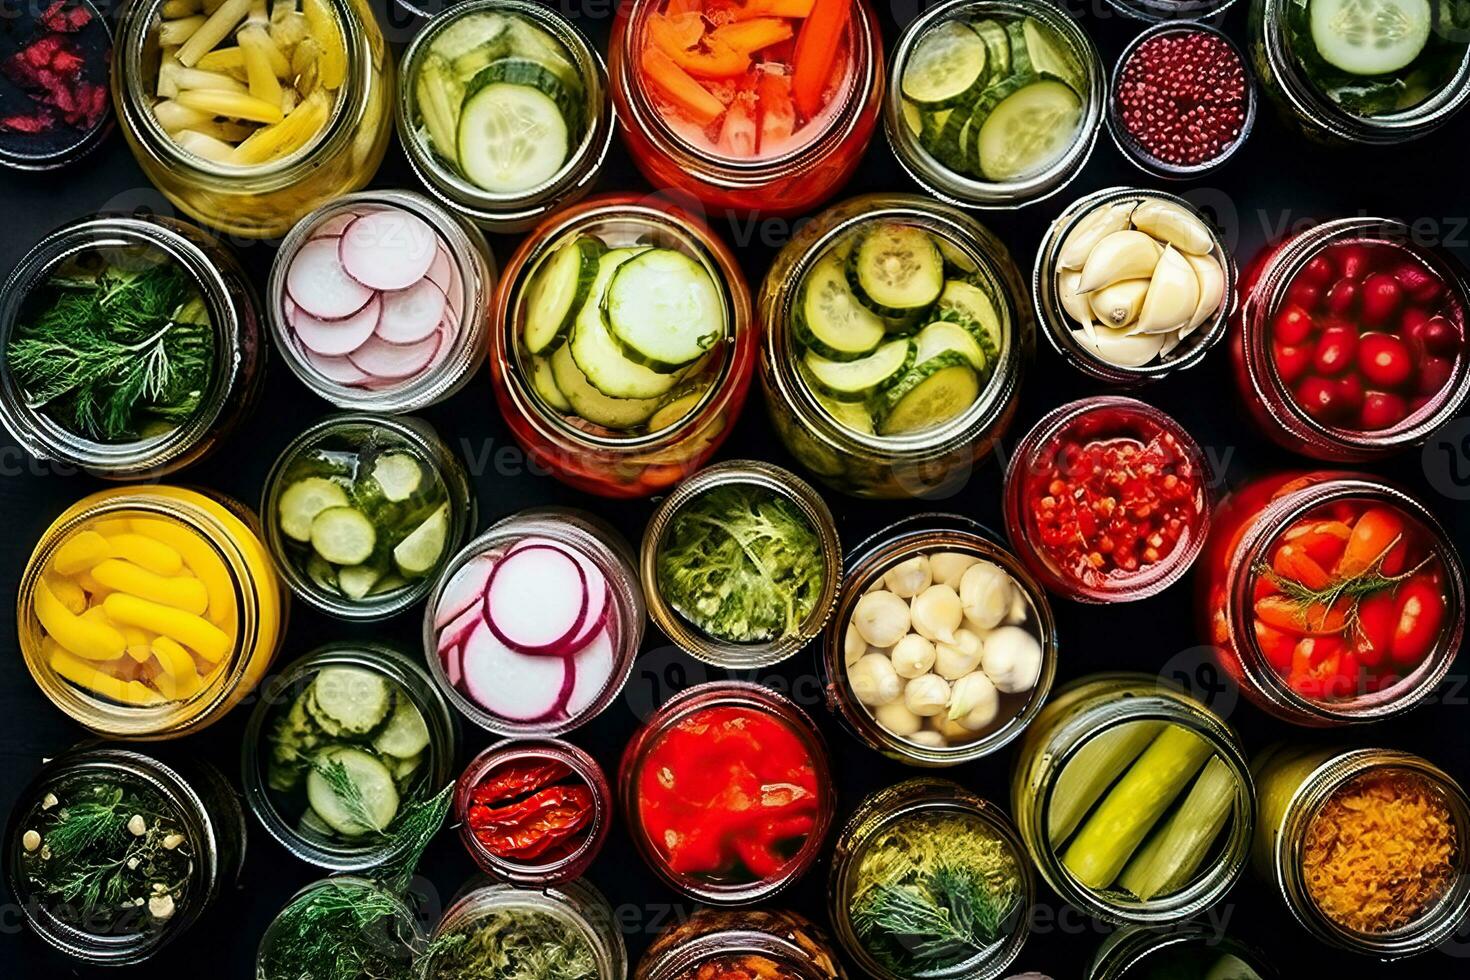 Fermented food overhead flat lay shot. Homemade vegetable preserves. Sauerkraut, pickles, kimchi etc in glass jars. Healthy probiotic diet Generated image photo